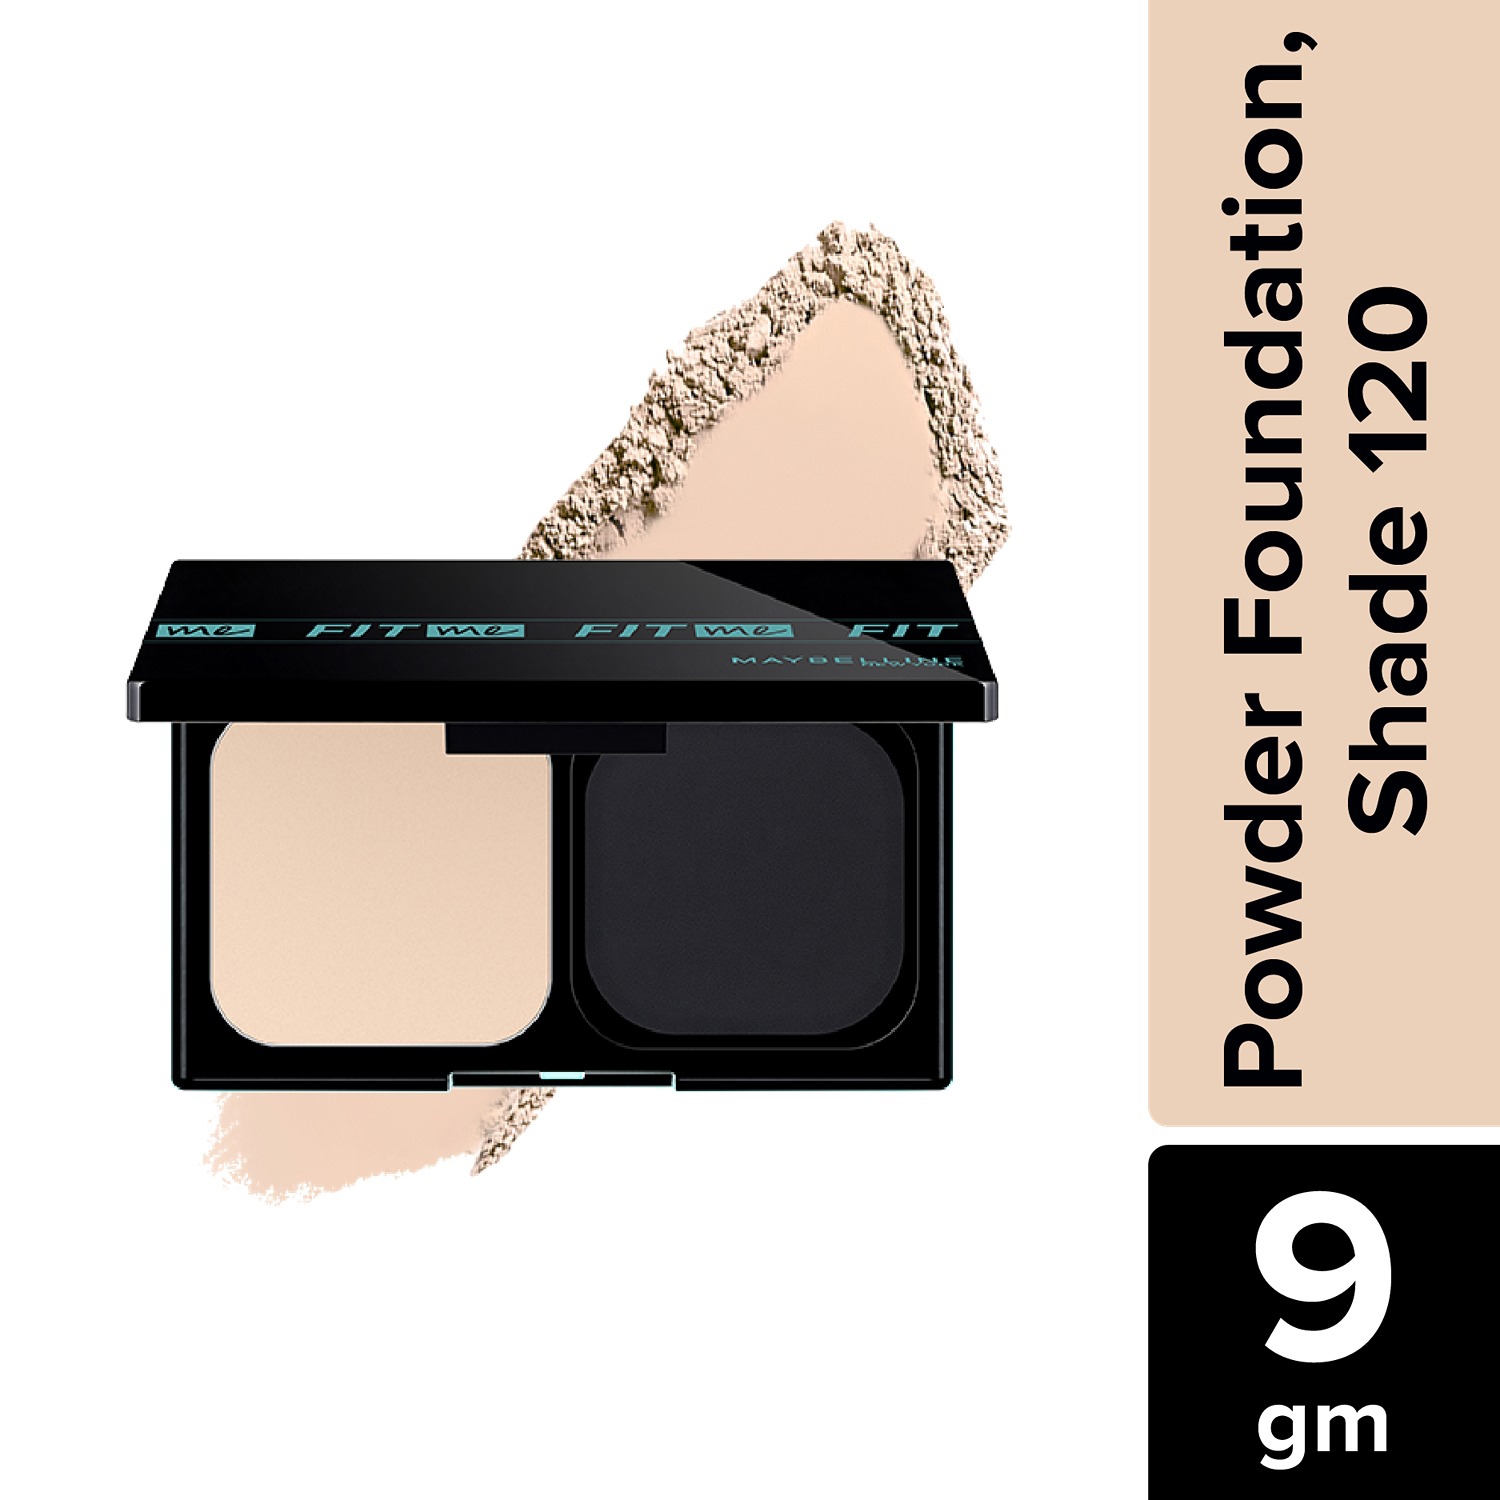 Maybelline New York | Maybelline New York Fit Me Ultimate Powder Foundation - Shade 120 (9g)